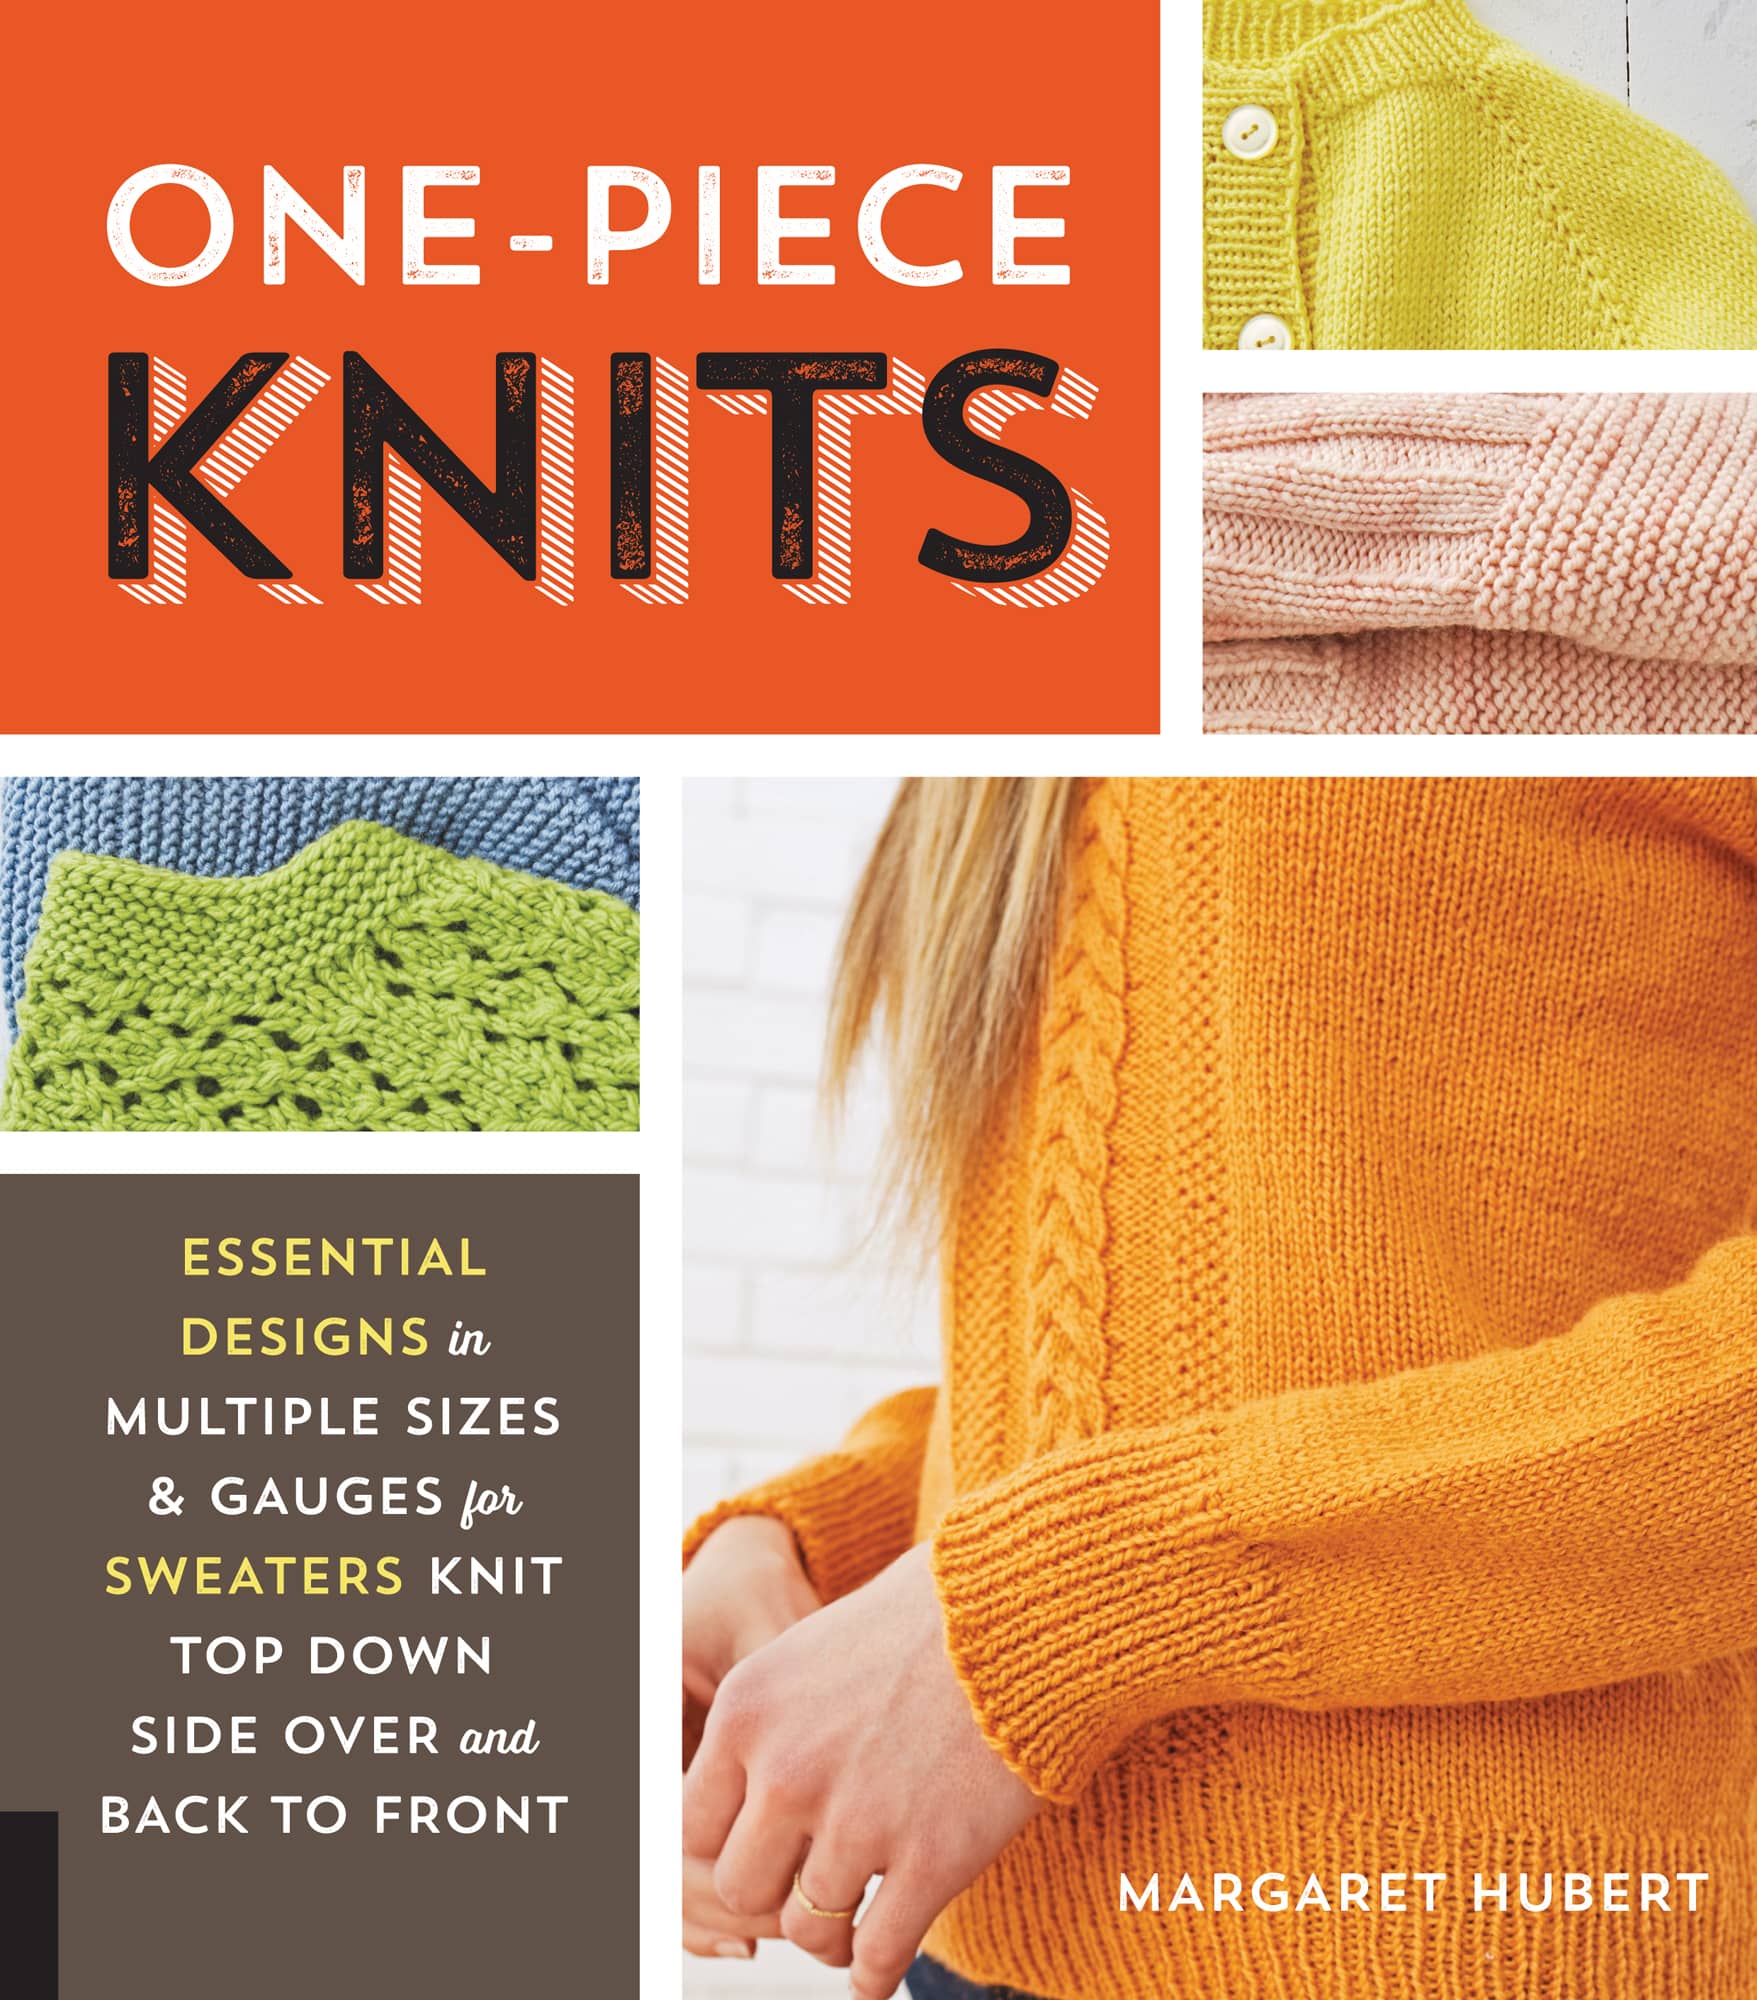 ONE-PIECE KNITS ESSENTIAL DESIGNS in MULTIPLE SIZES GAUGES for SWEATERS - photo 1